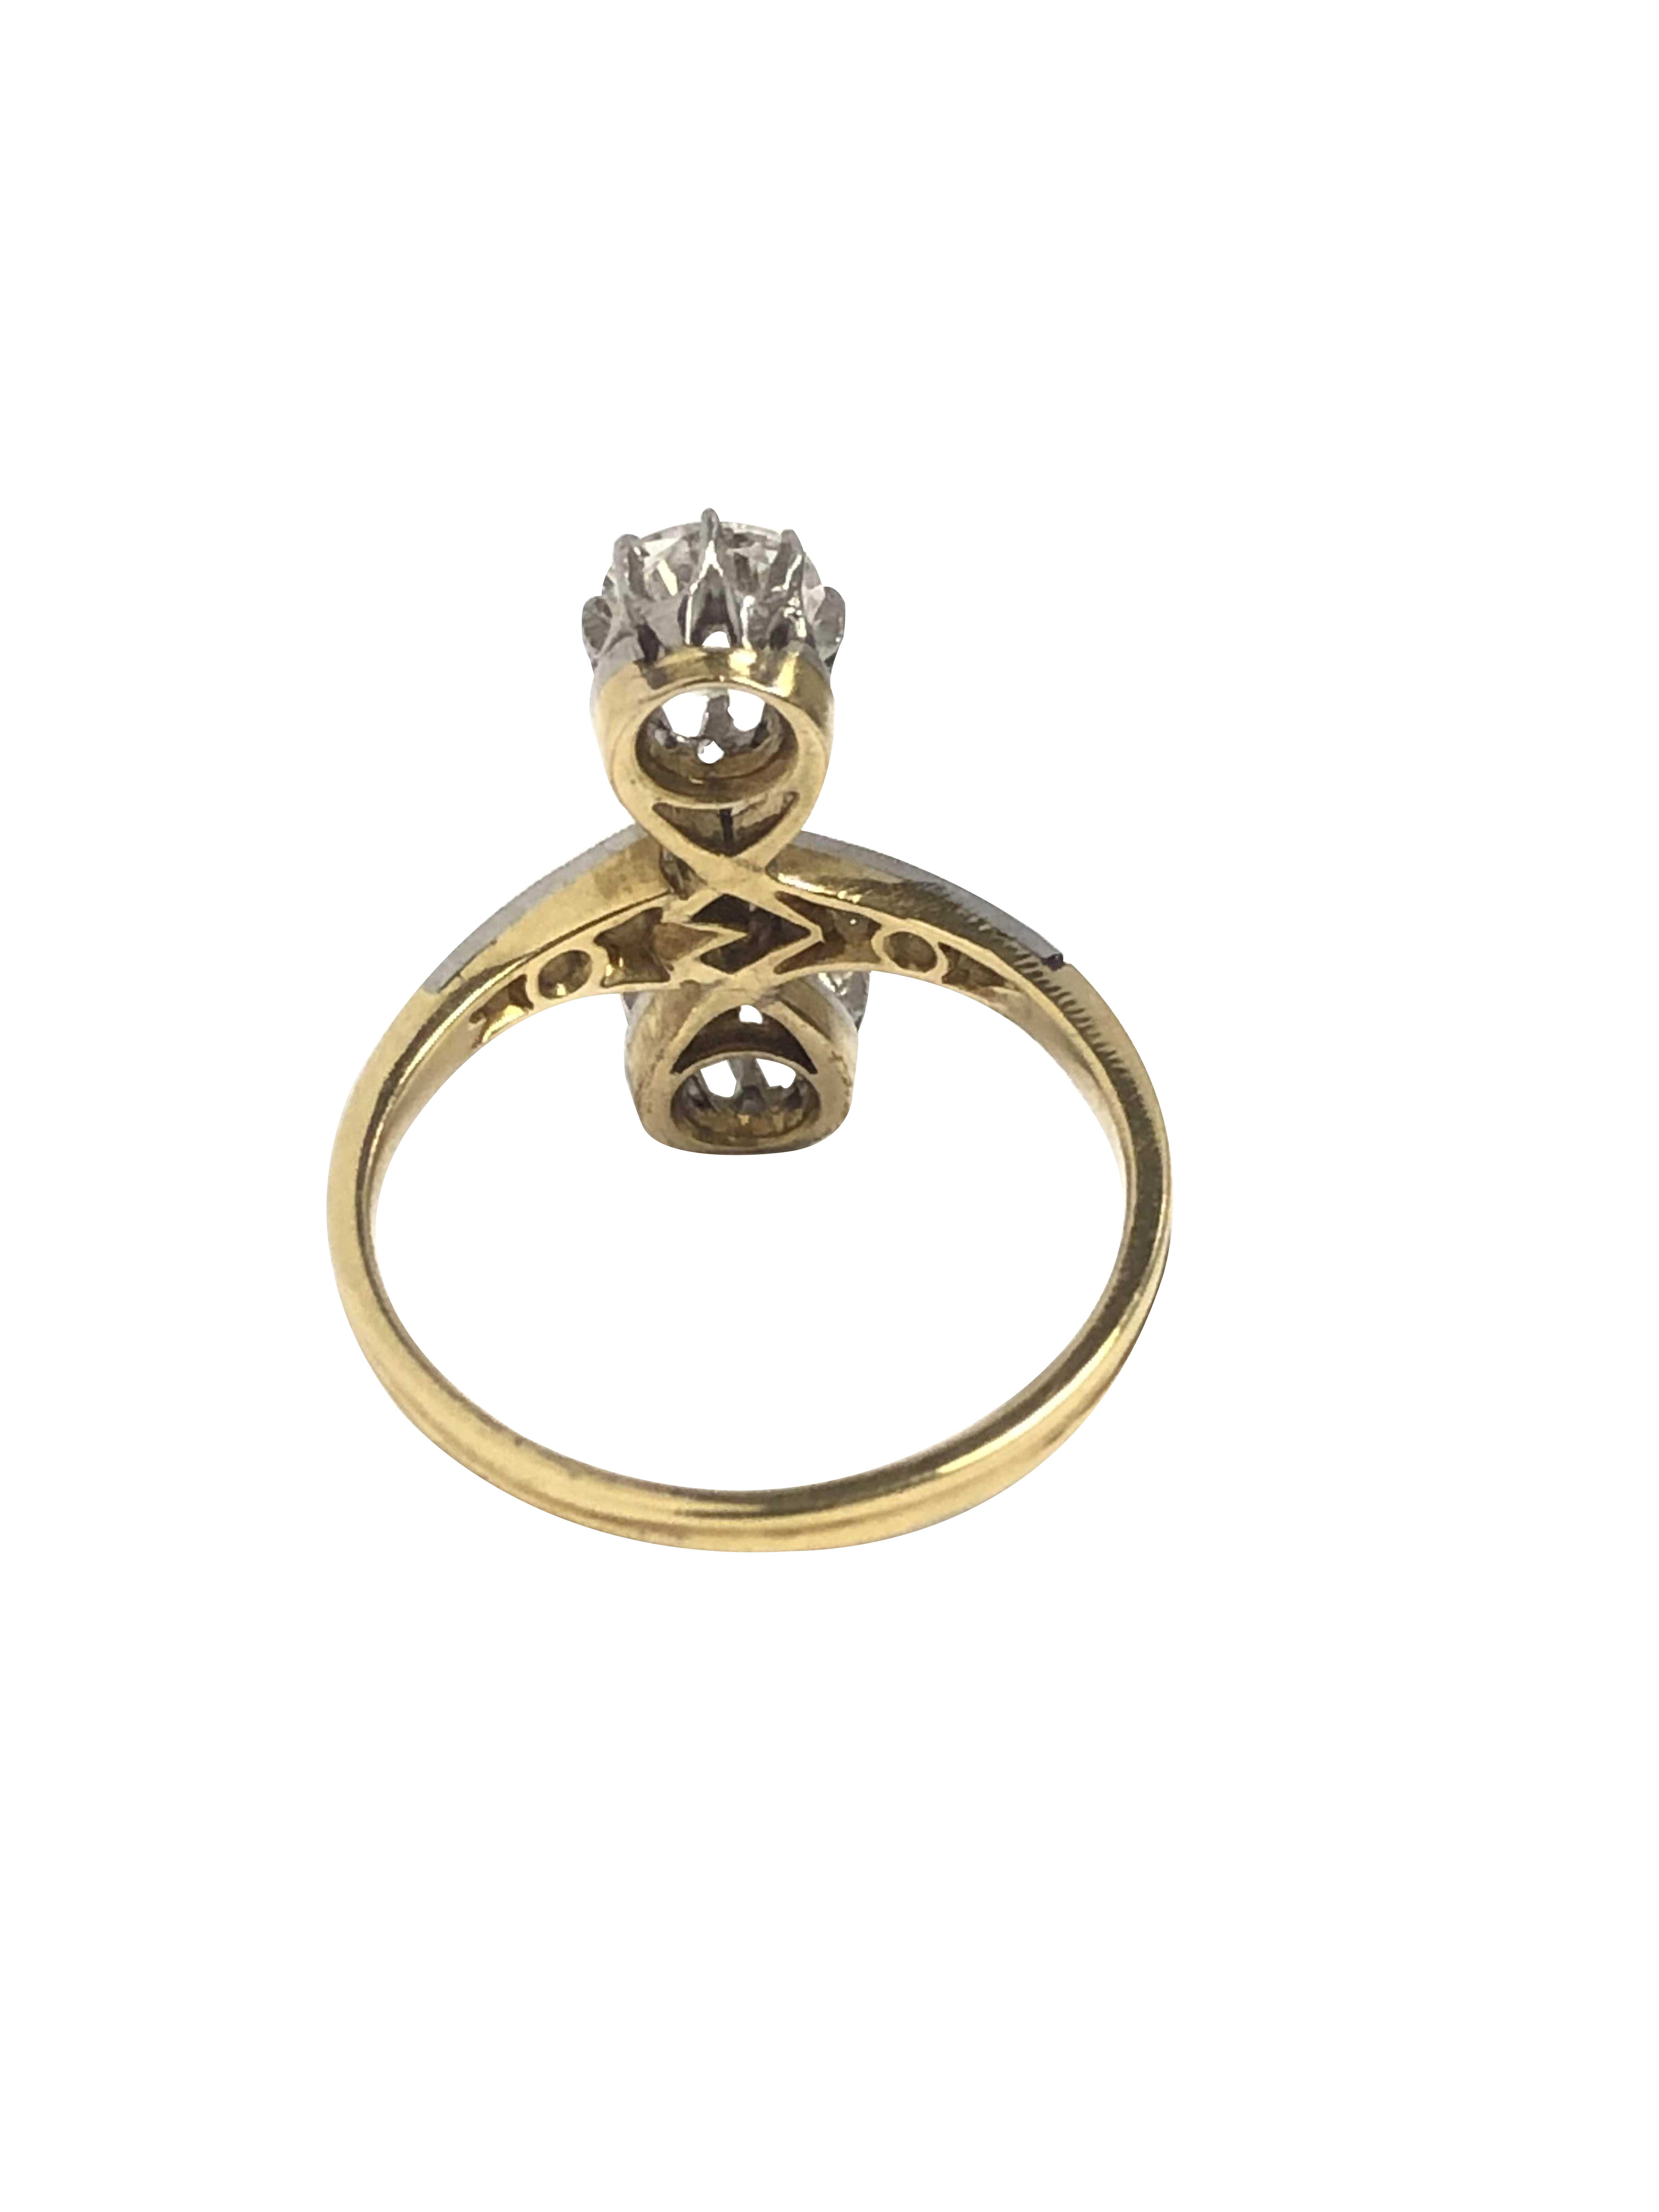 Edwardian Antique Gold Platinum and Diamond Ring For Sale